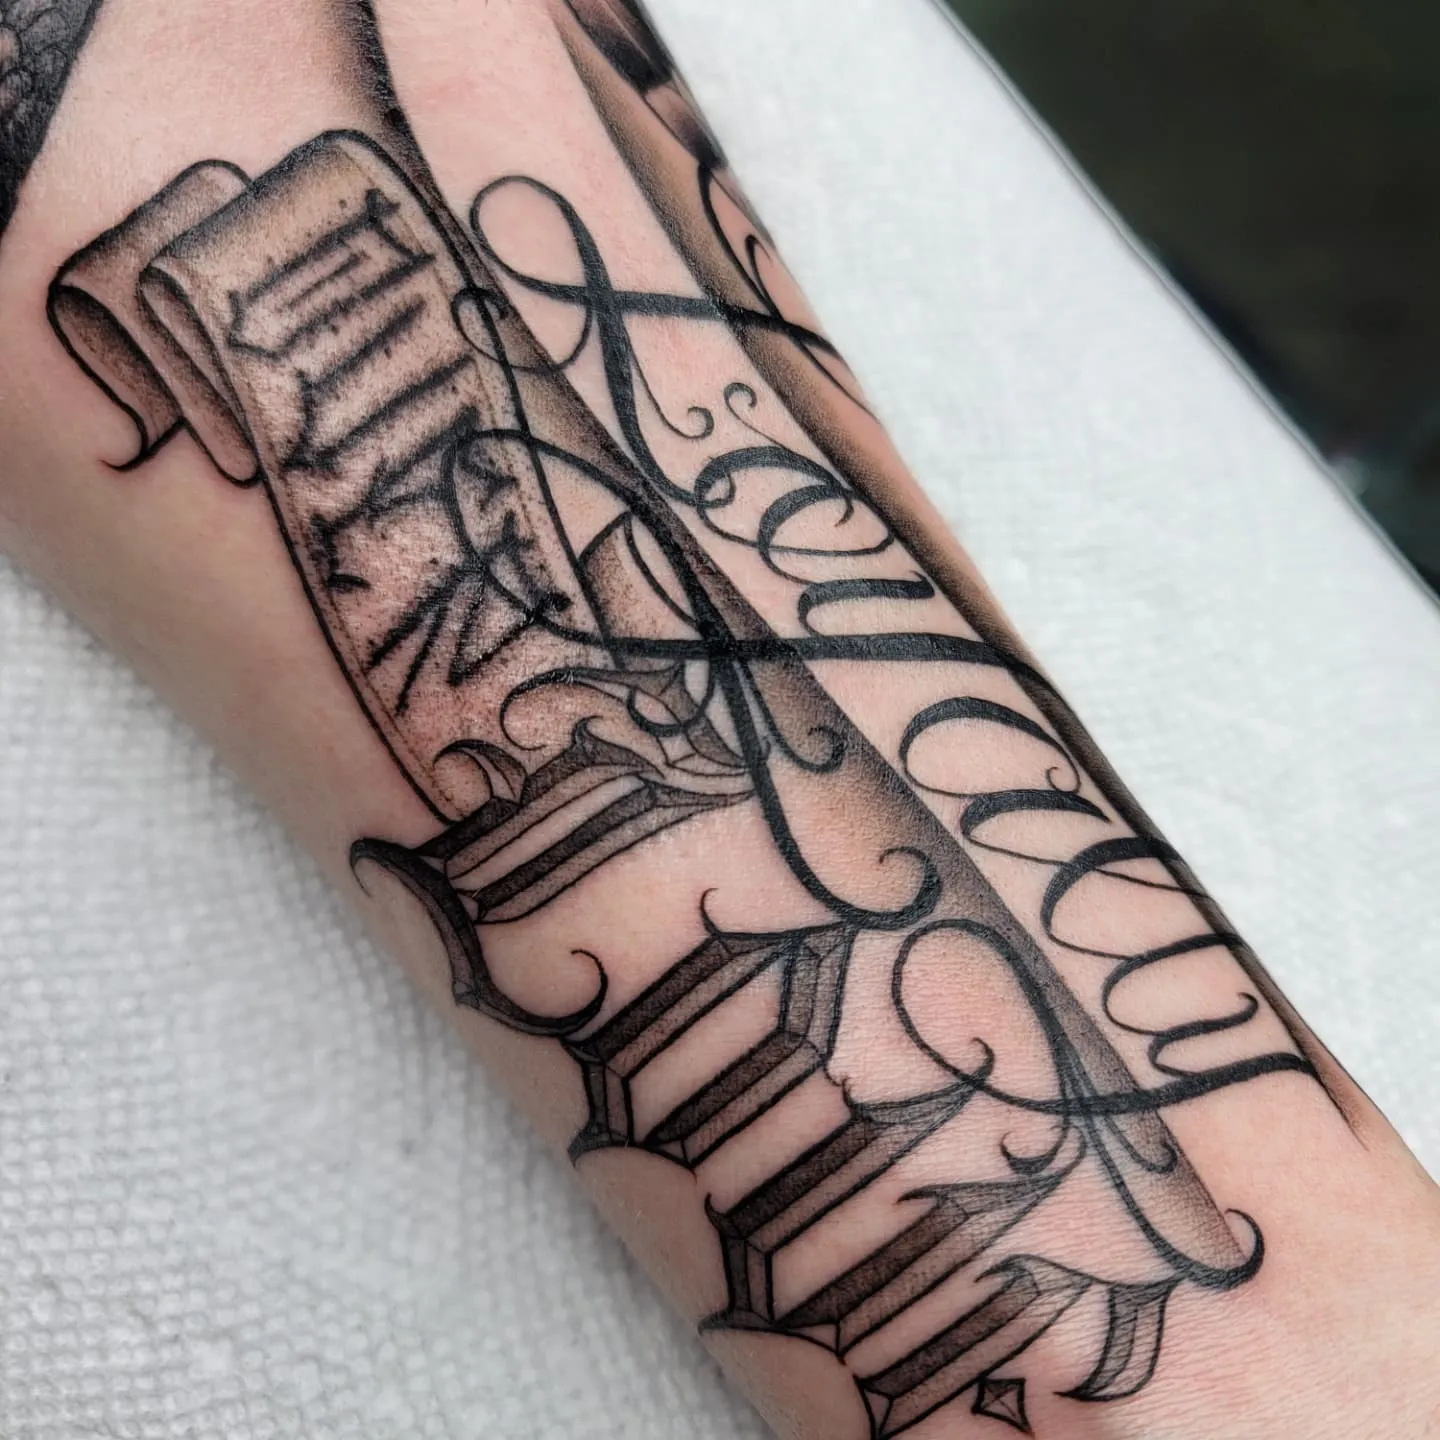 Intricate Forearm Tattoo Embodies Loyalty Over Love